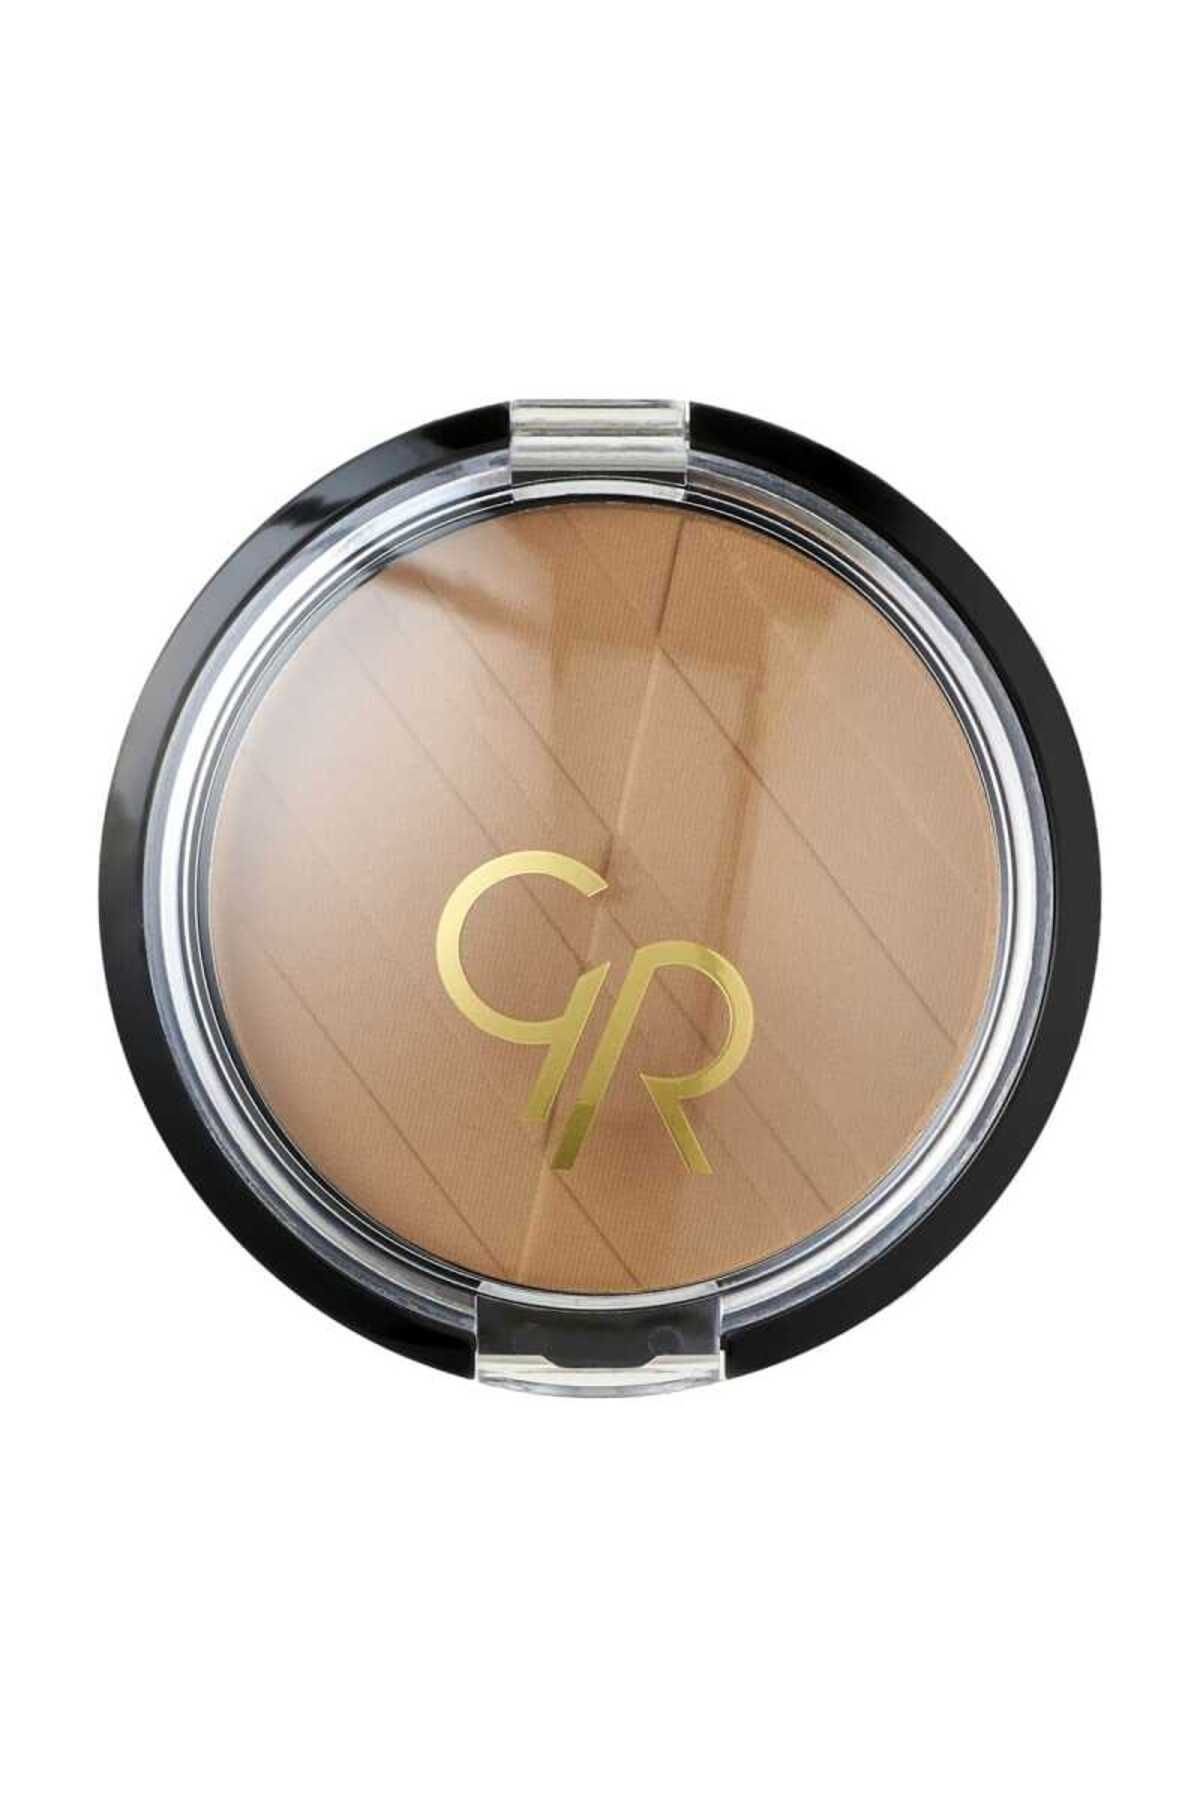 Golden Rose Pudra - Silky Touch Compact Powder No: 01